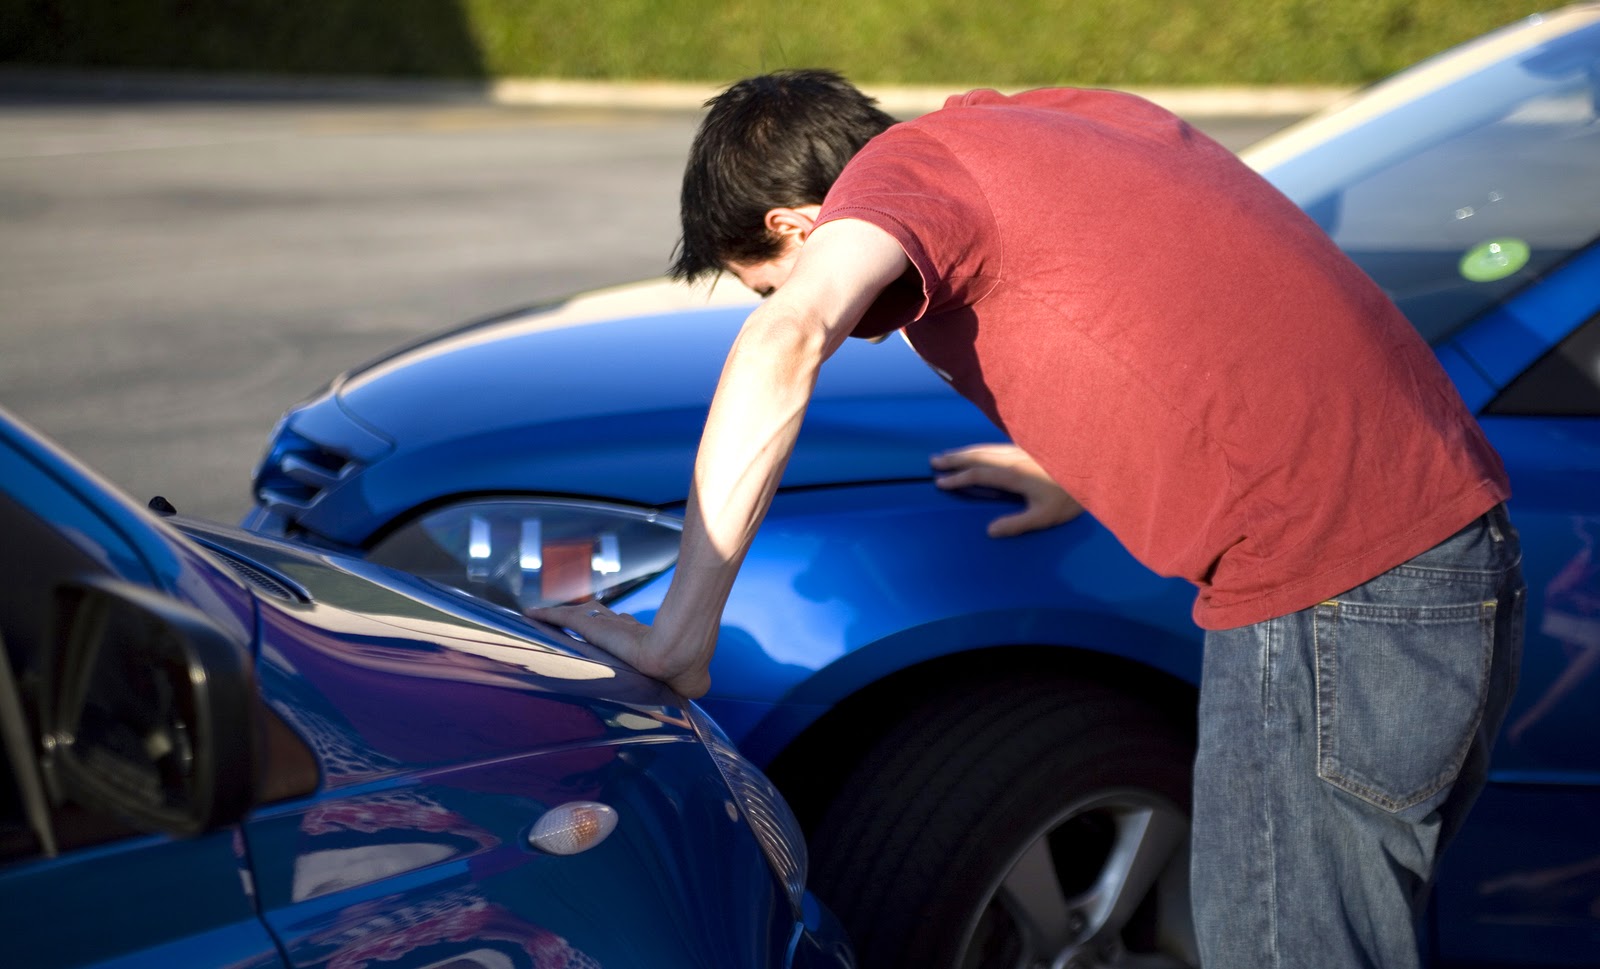 alabama car crash lawyers - What Should I Do if I Was Injured in a Car Accident in Alabama?